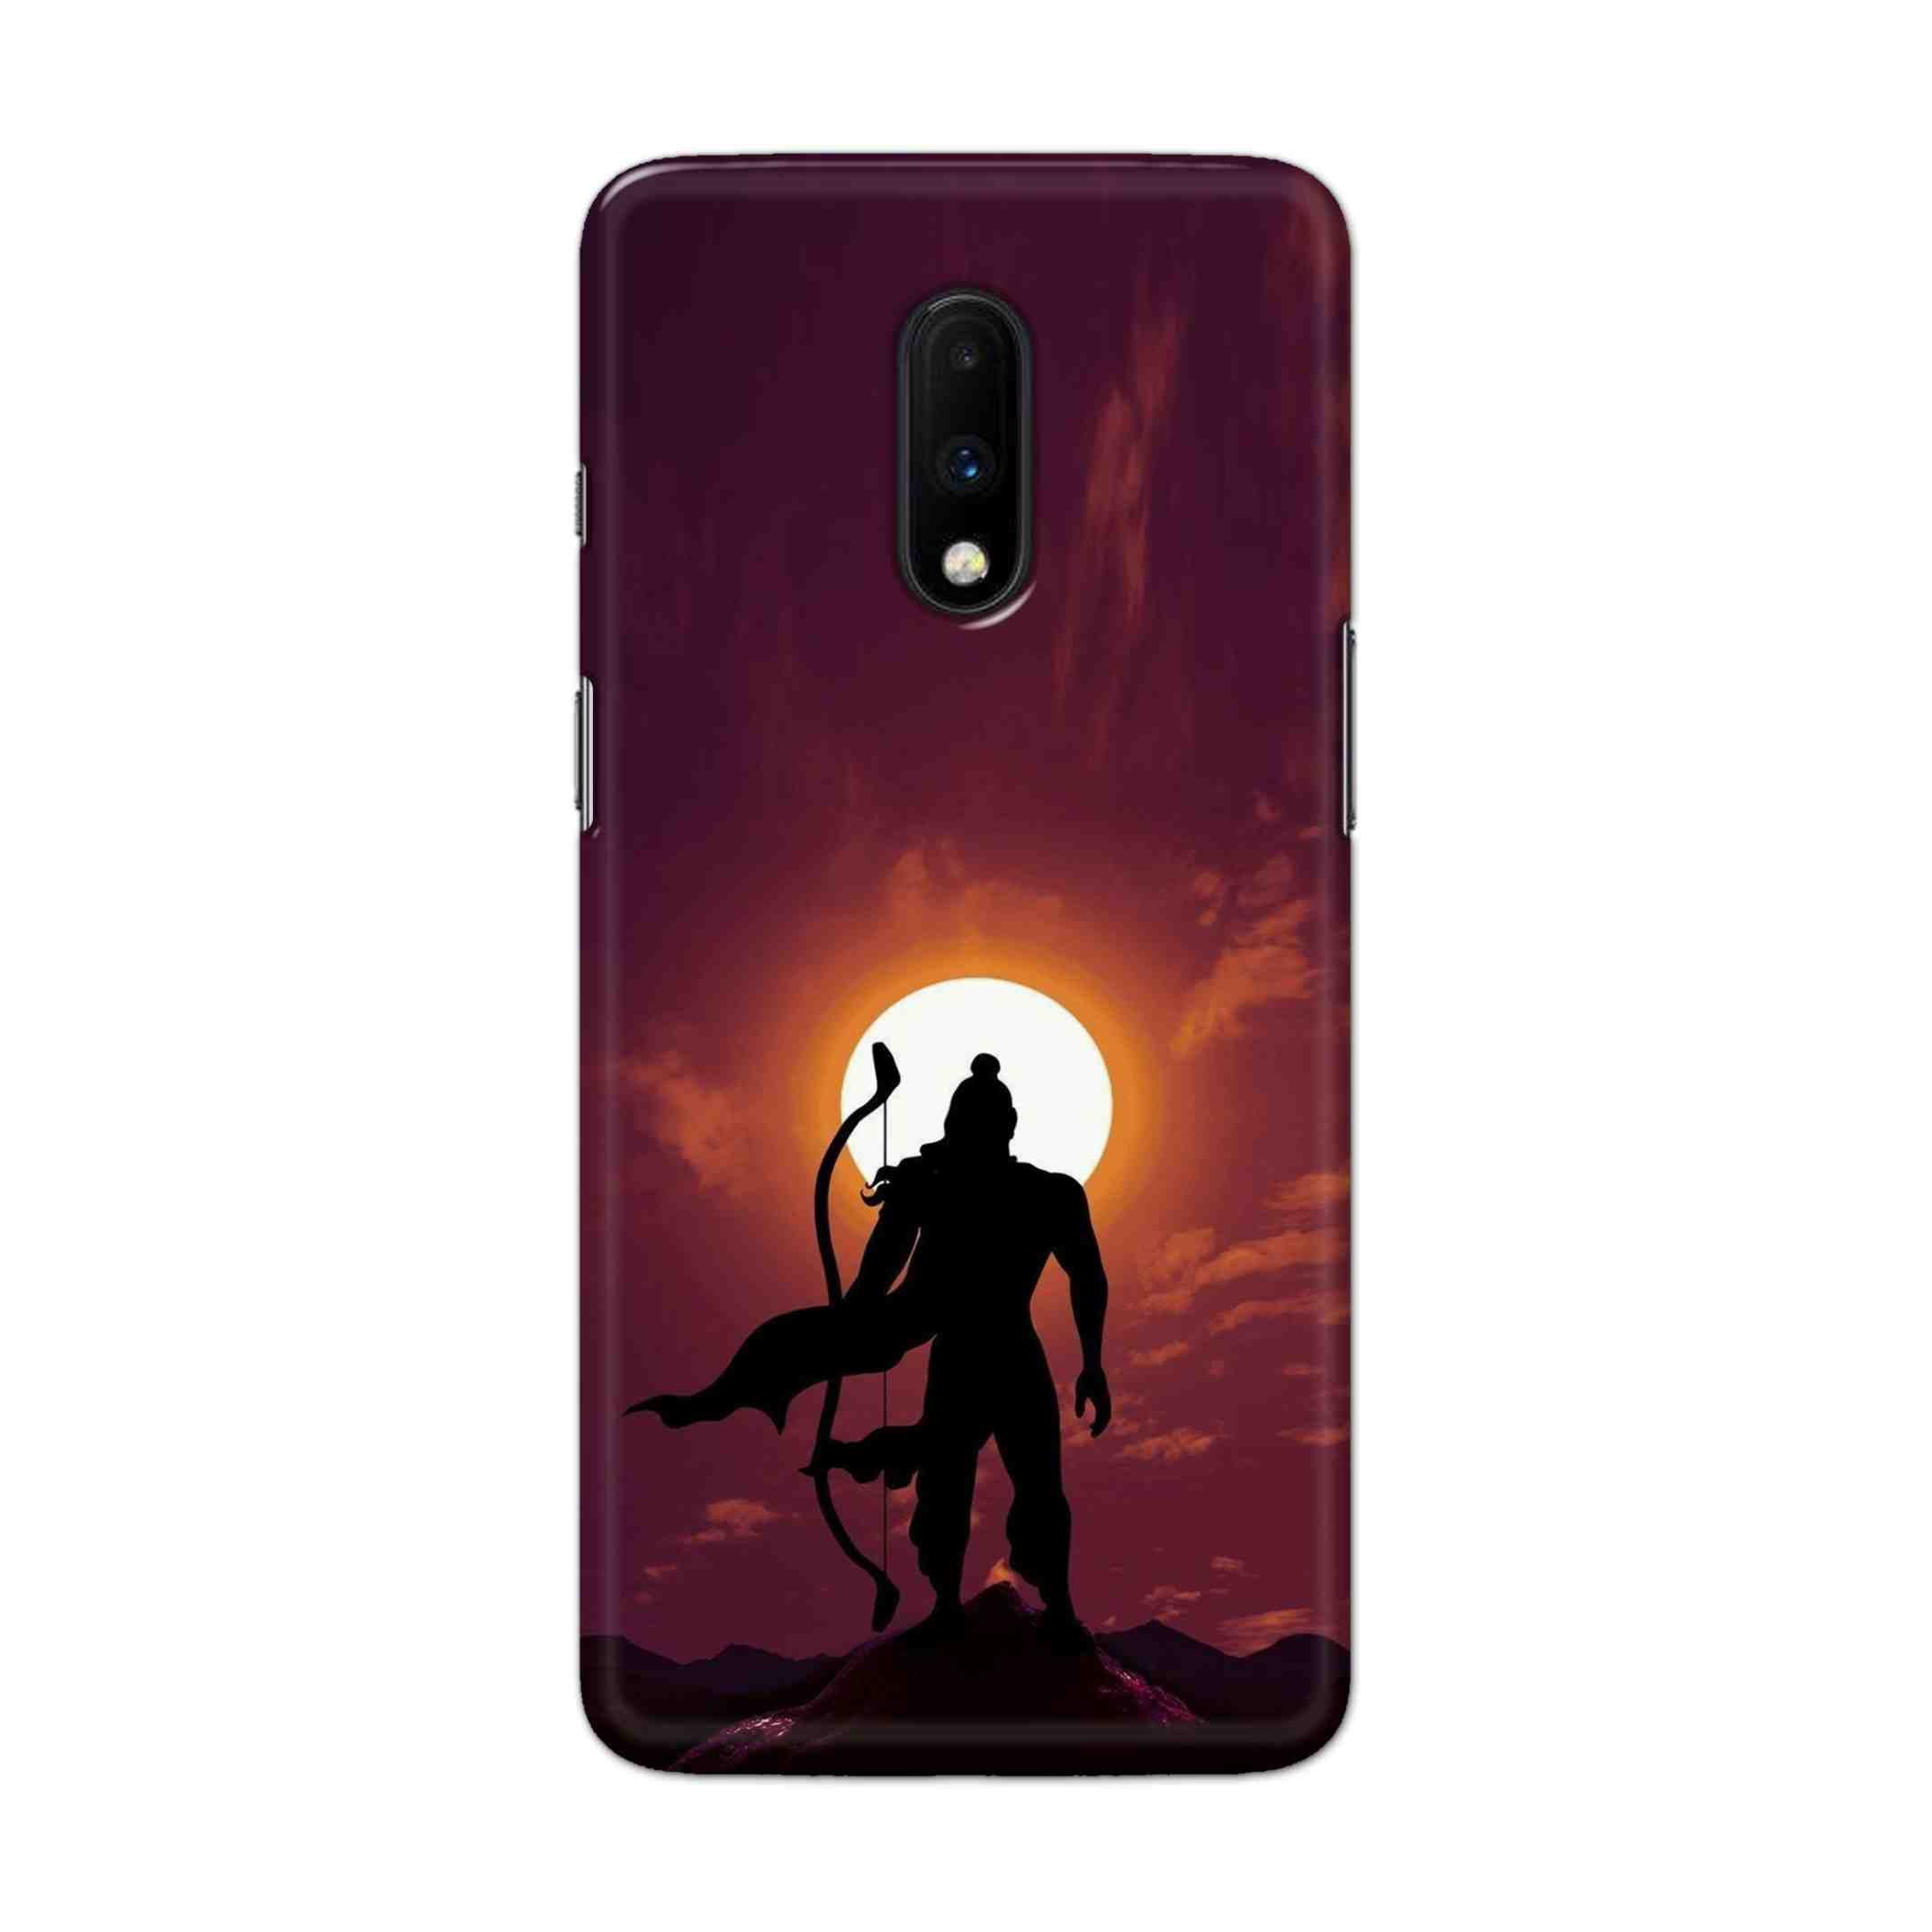 Buy Ram Hard Back Mobile Phone Case Cover For OnePlus 7 Online